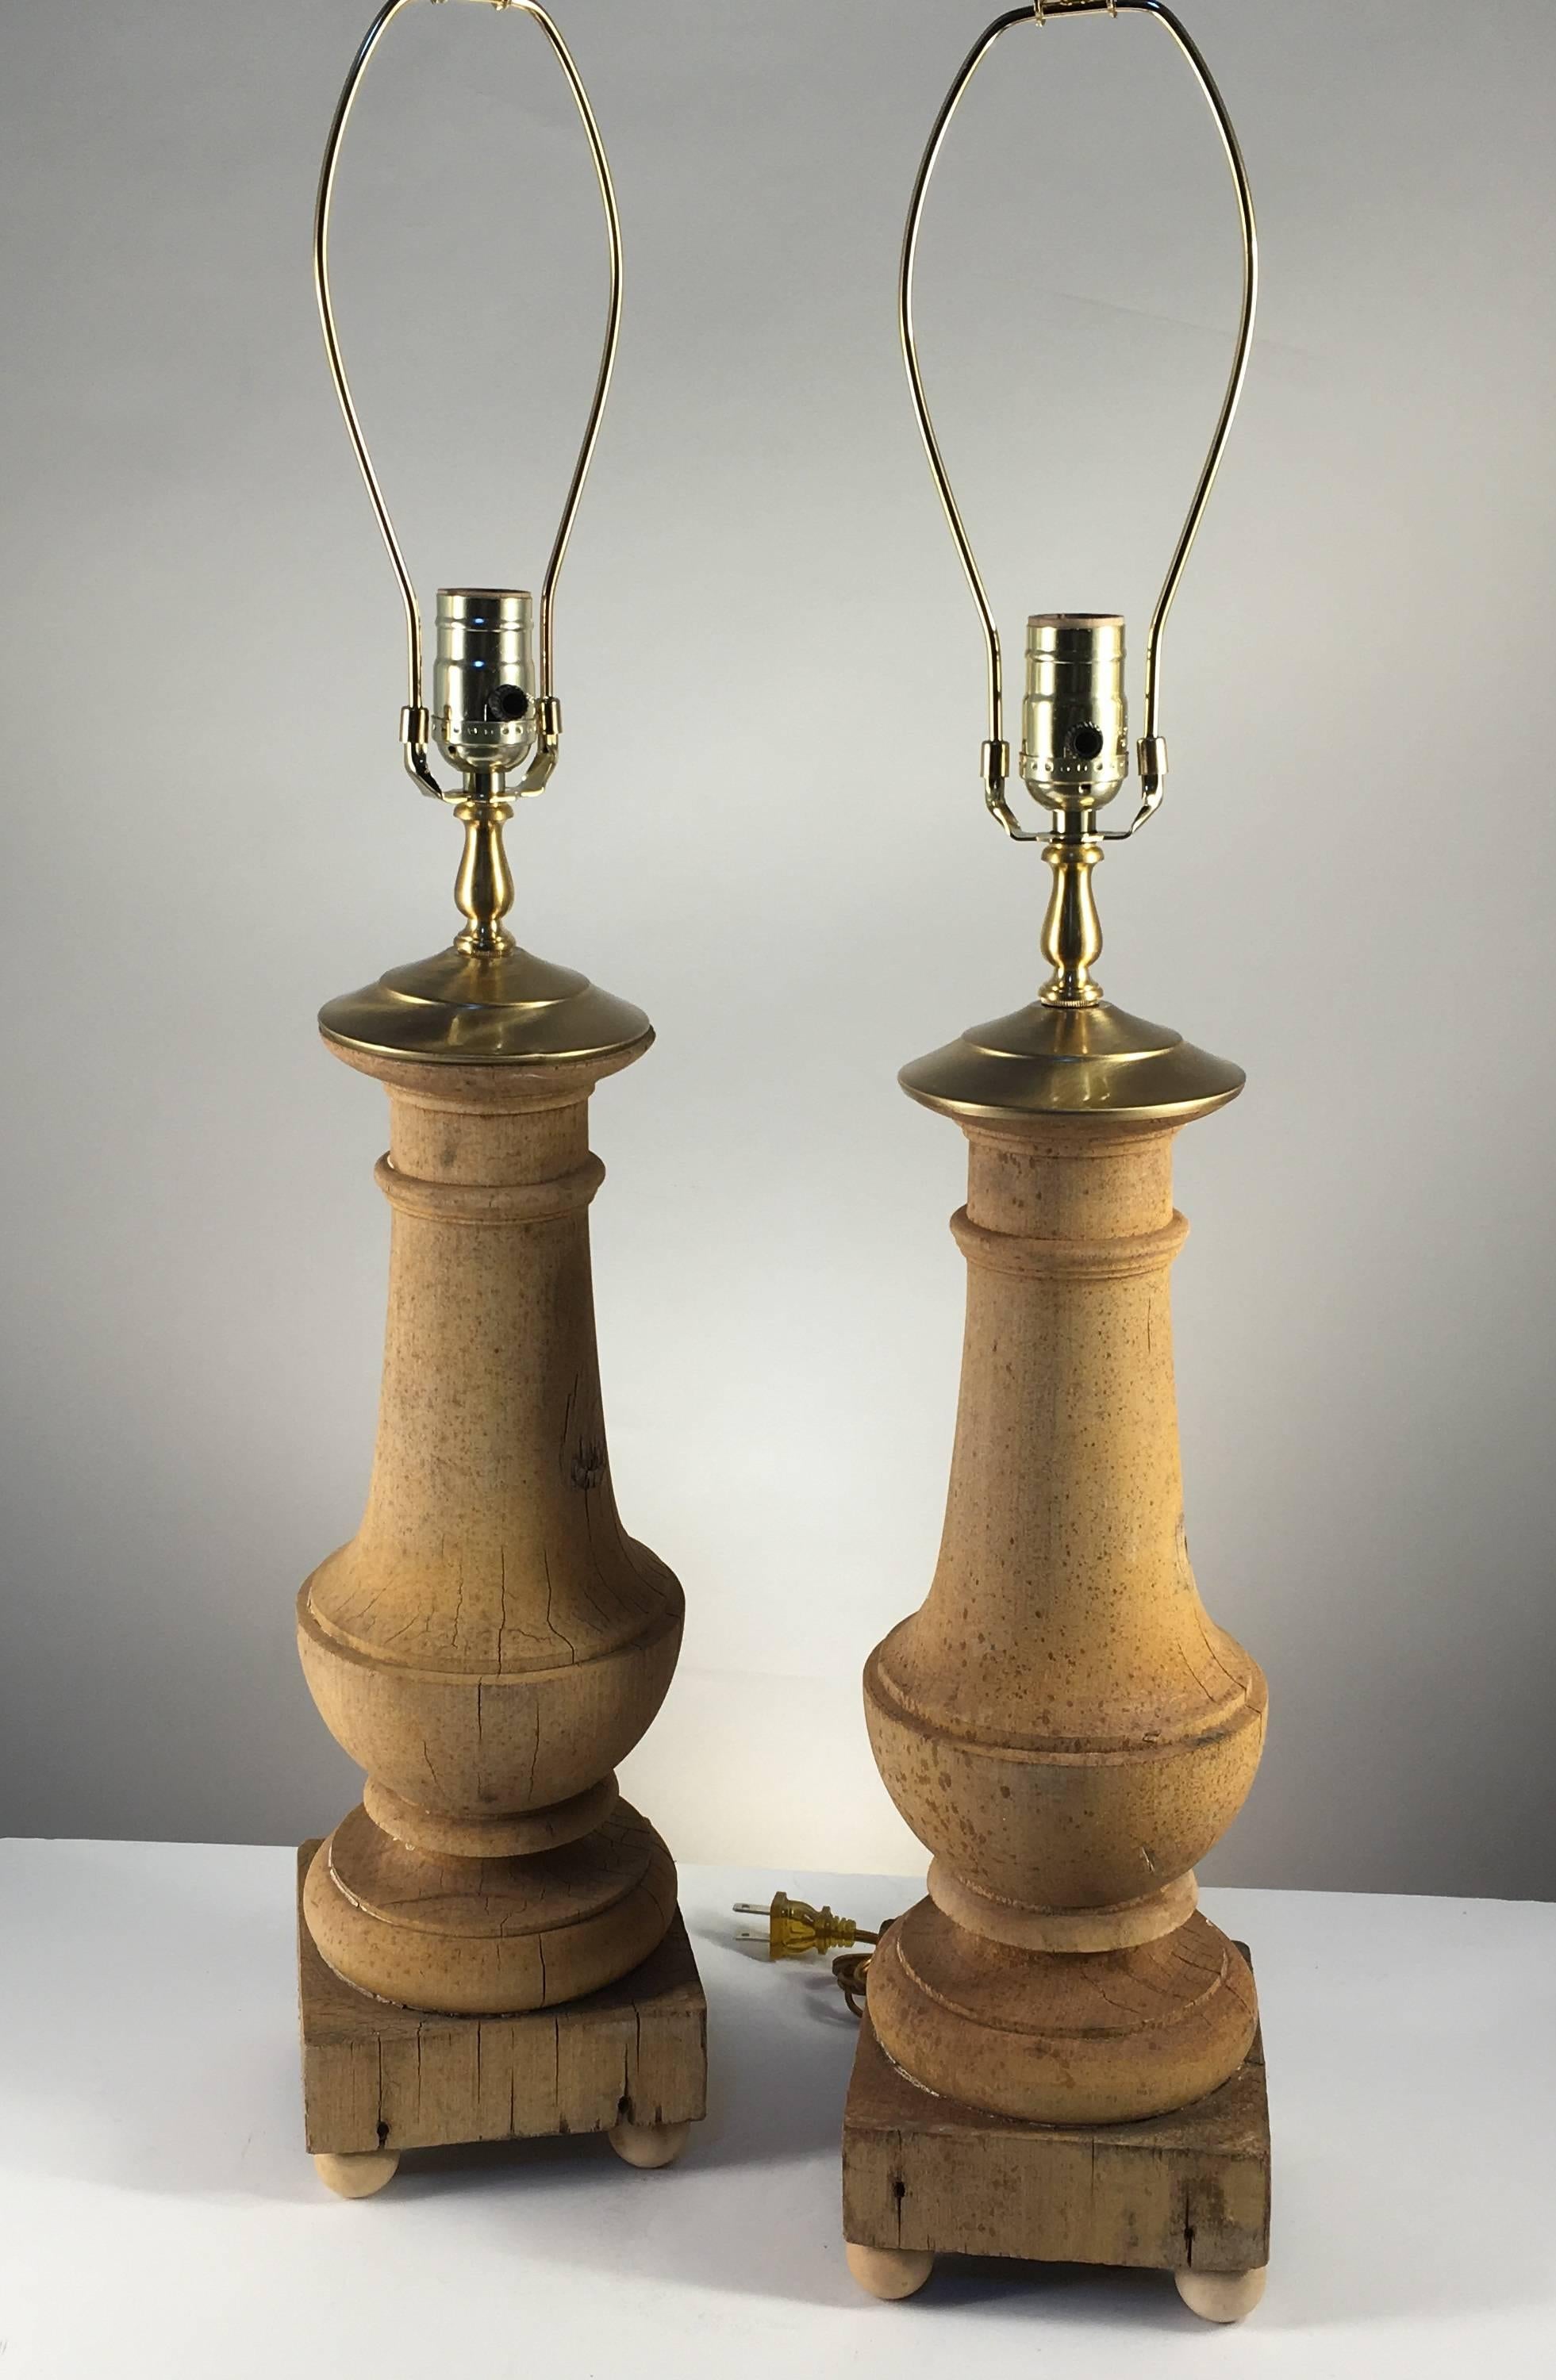 A pair of baluster form lamps in stripped pine, architectural elements, recently wired for electricity with brass vase caps and hardware. A nice size and color.
Measures: 23" H without harp. 30" with harp.